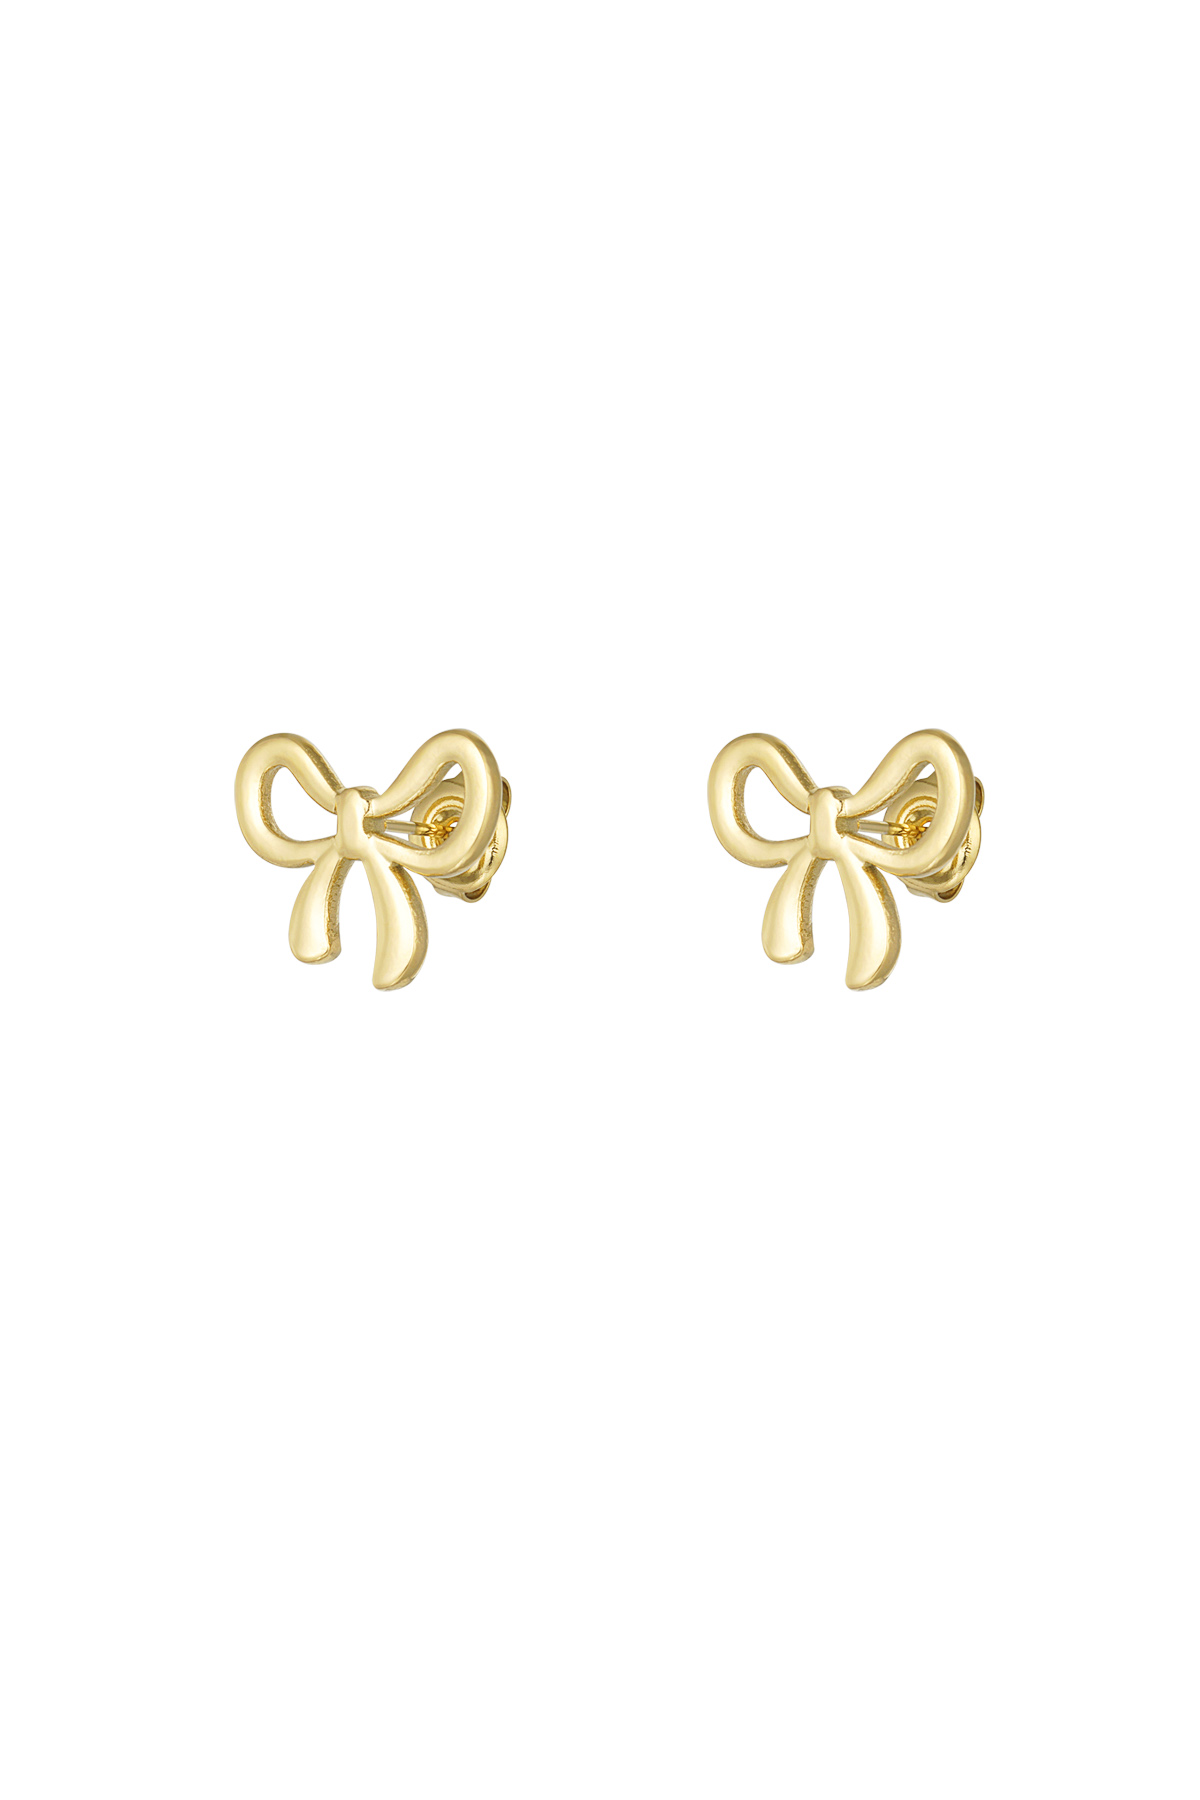 Stainless Steel Bowknot Earring - Gold